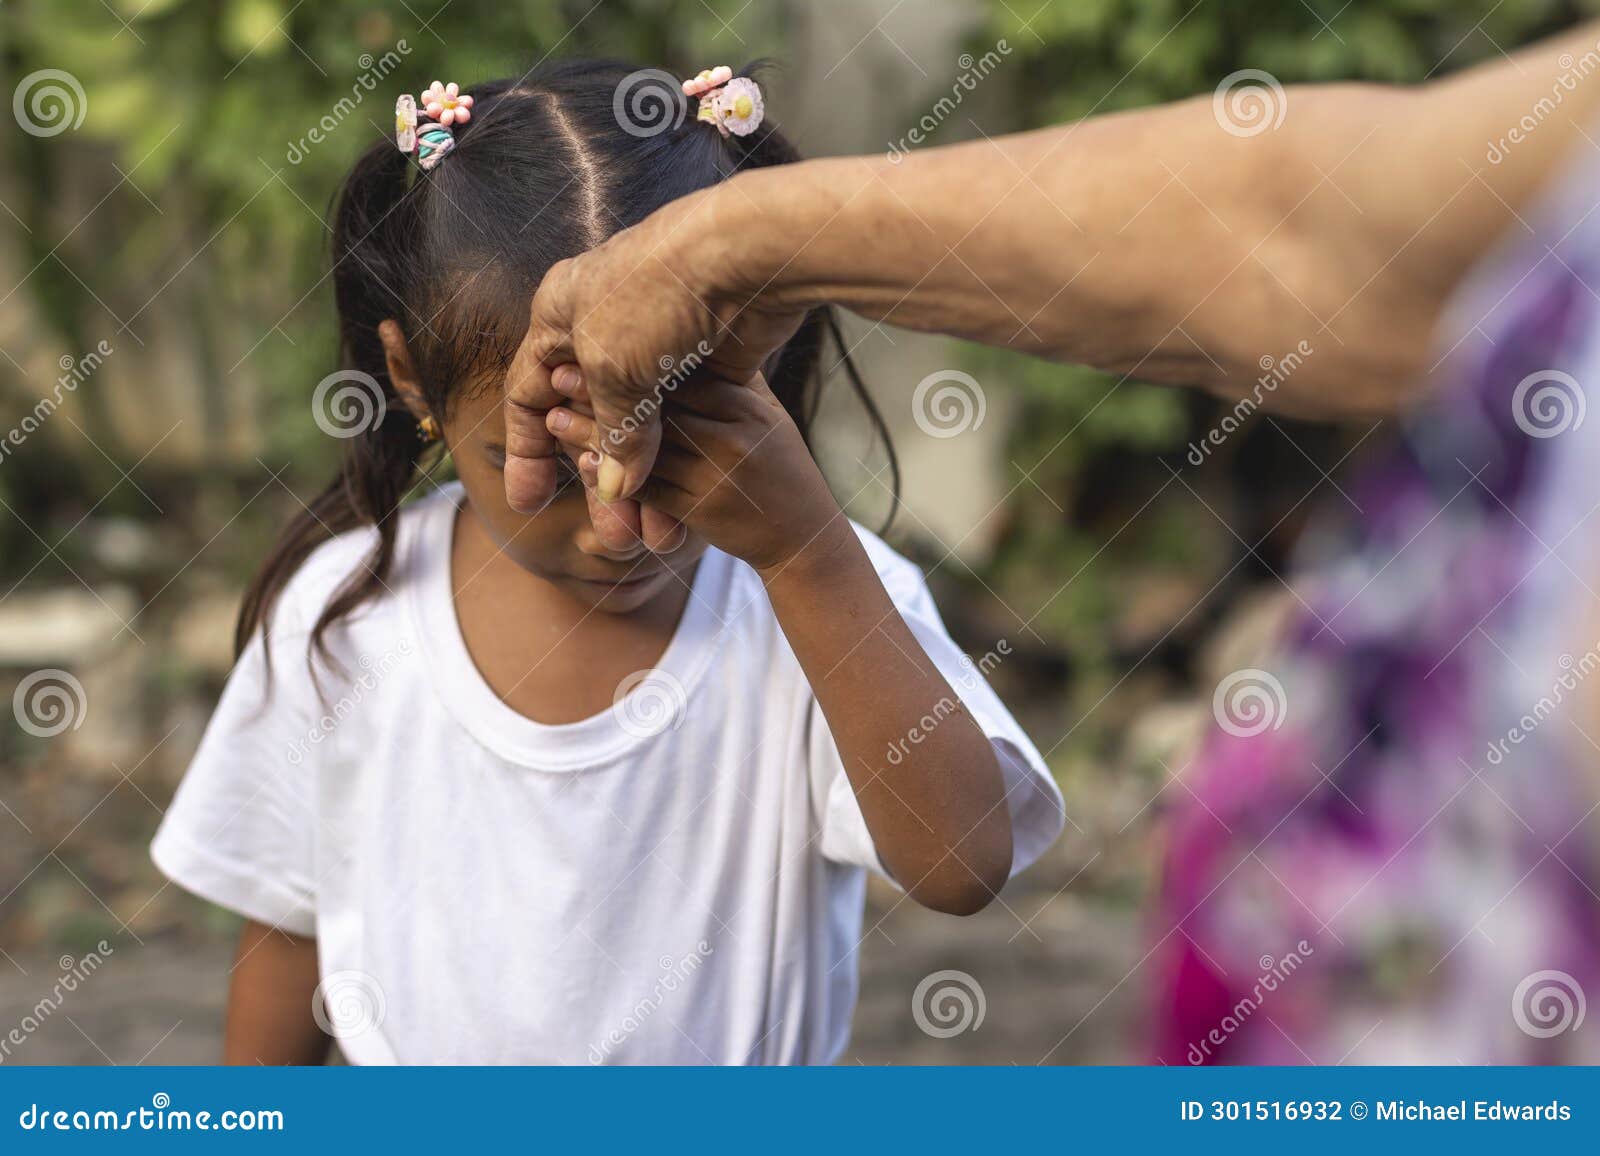 a respectful young girl does the mano po gesture to his grandmother. a sign of respect and reverence to your elders in the